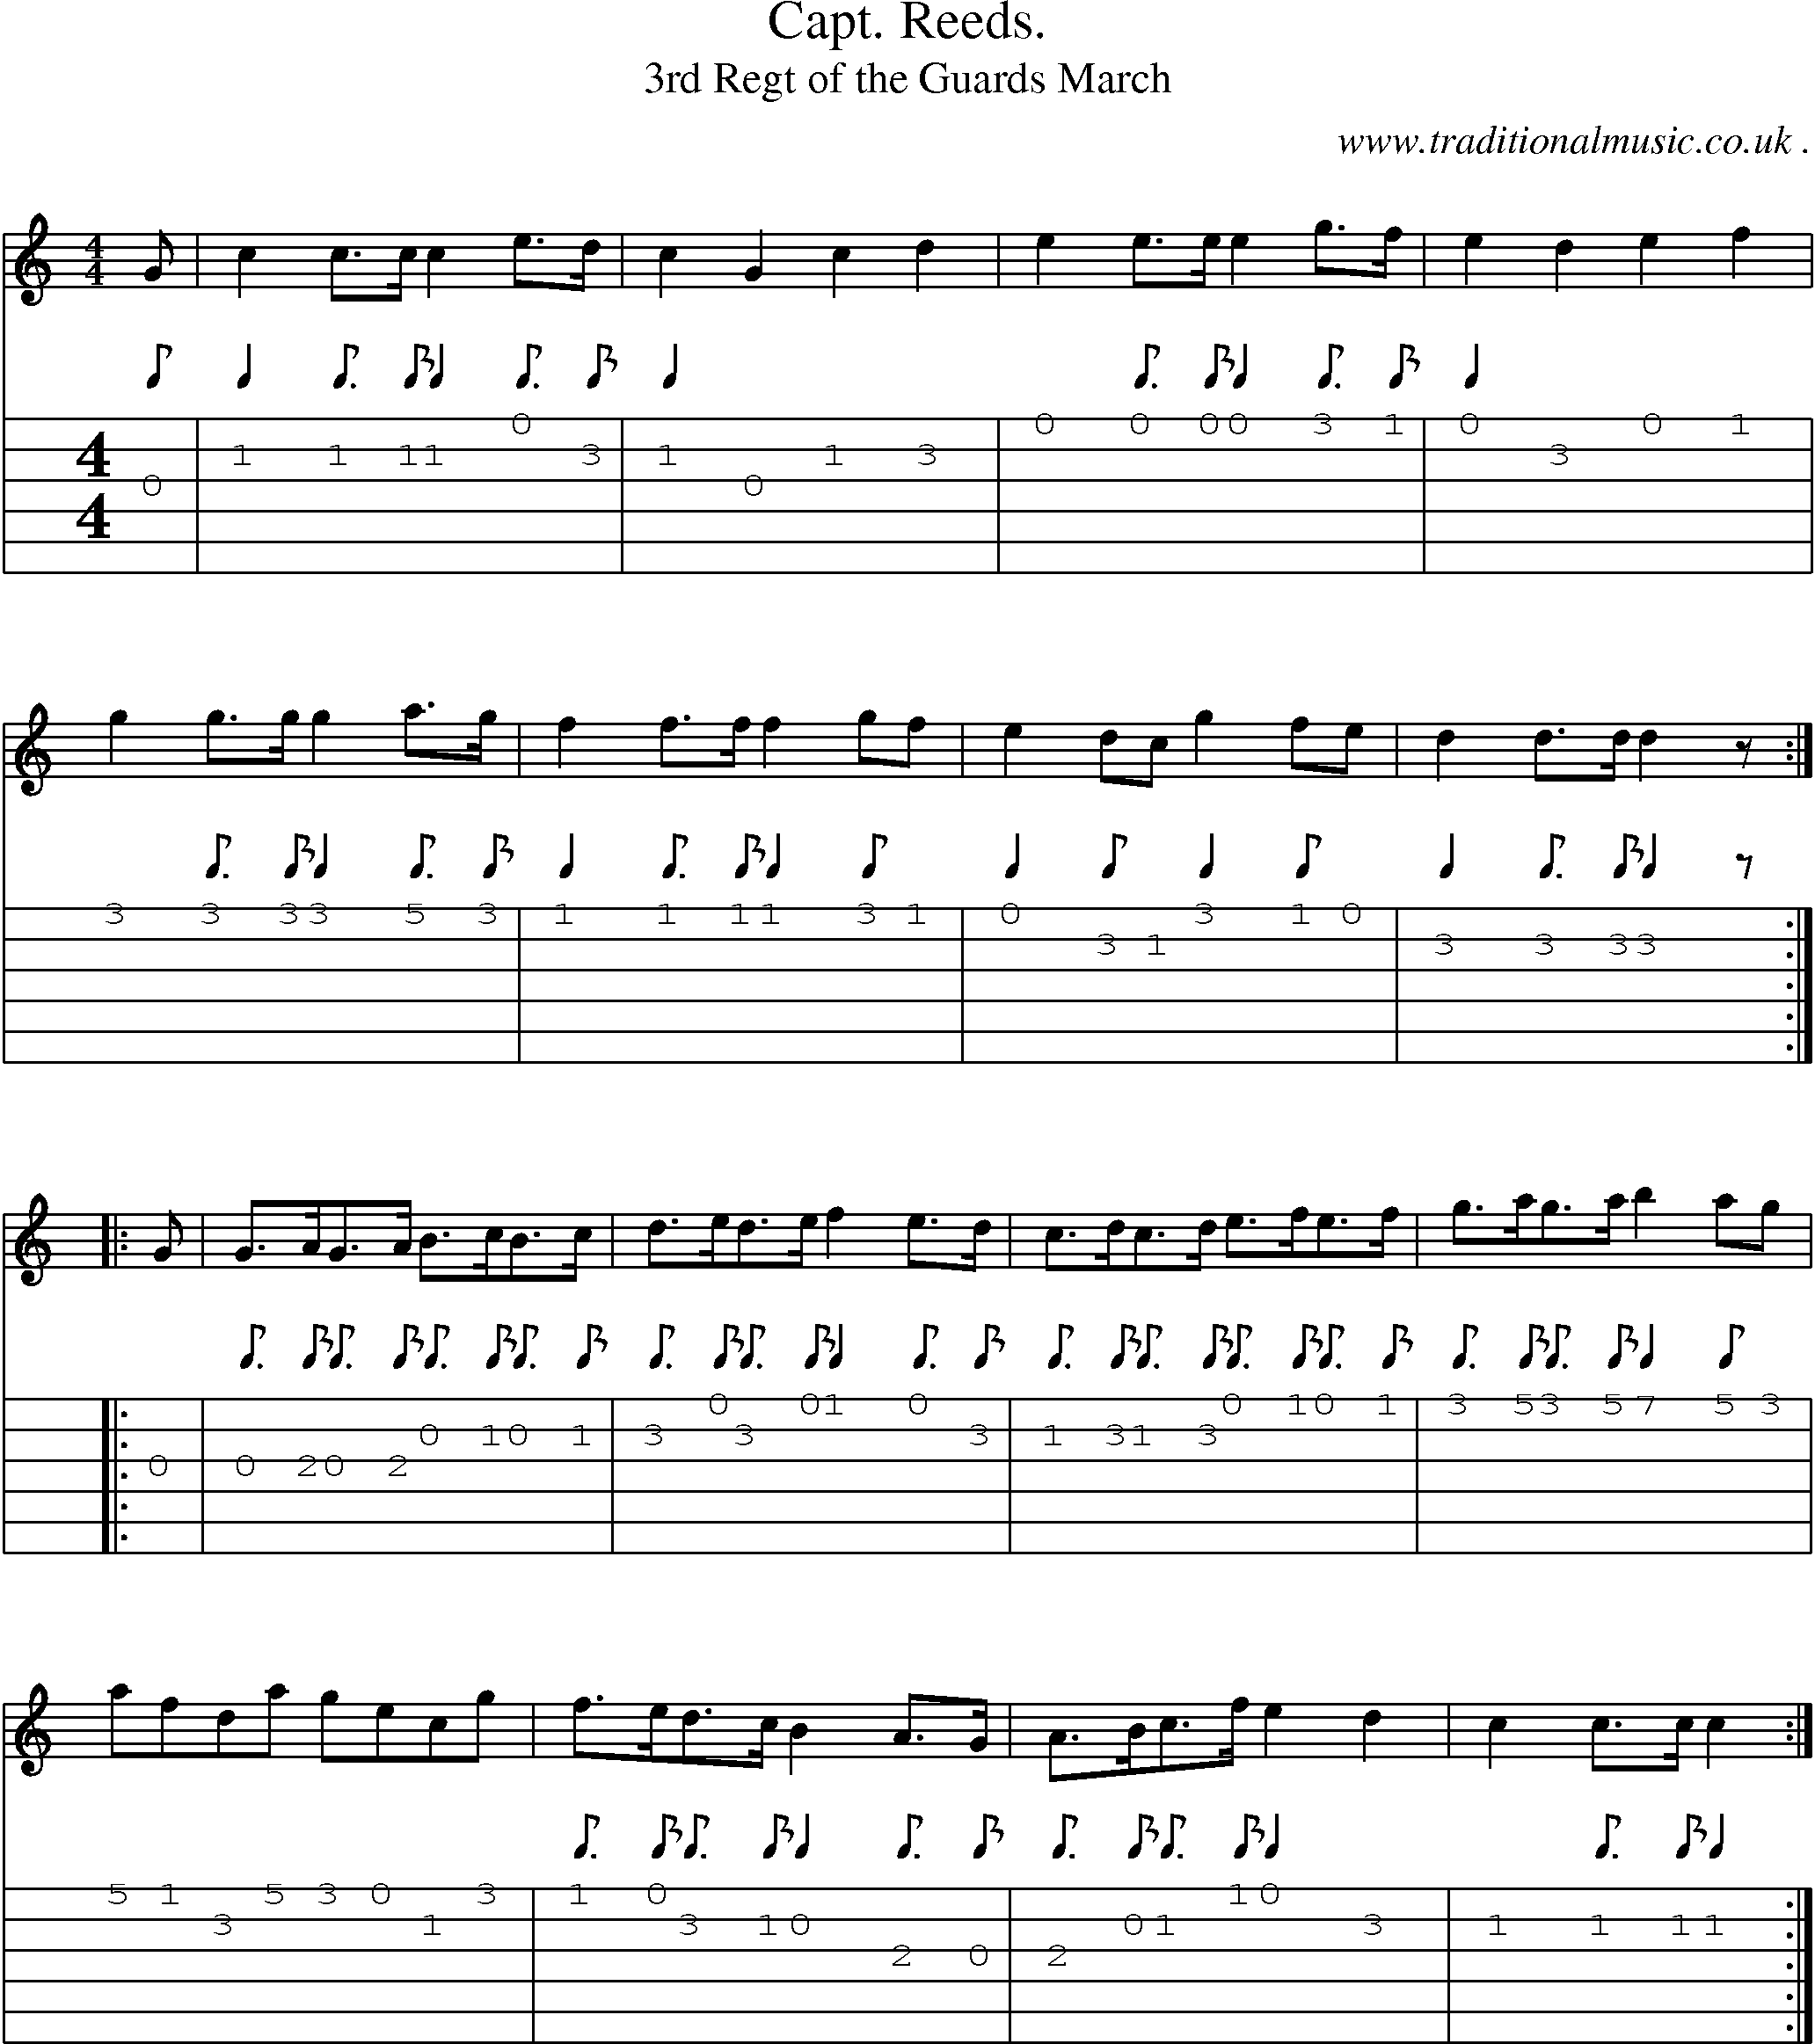 Sheet-Music and Guitar Tabs for Capt Reeds